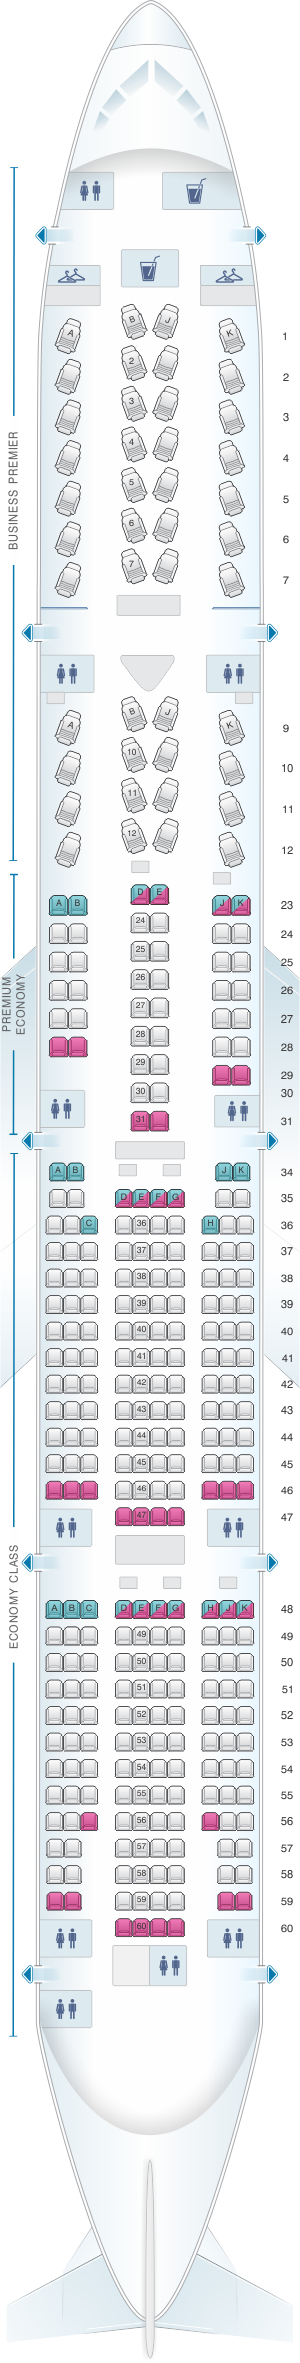 Seat map for Air New Zealand Boeing B777 300